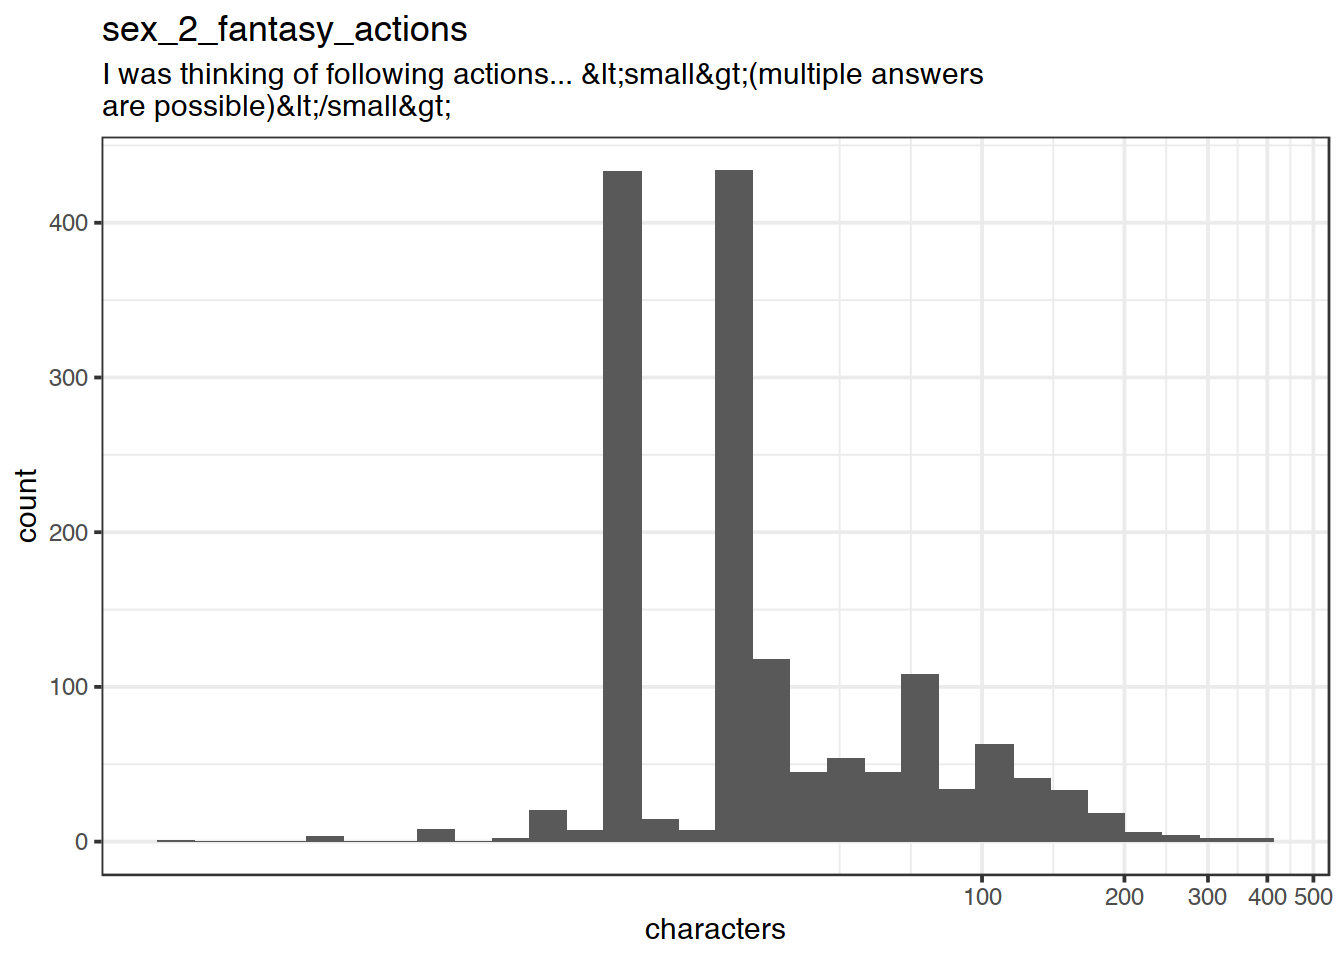 Distribution of values for sex_2_fantasy_actions